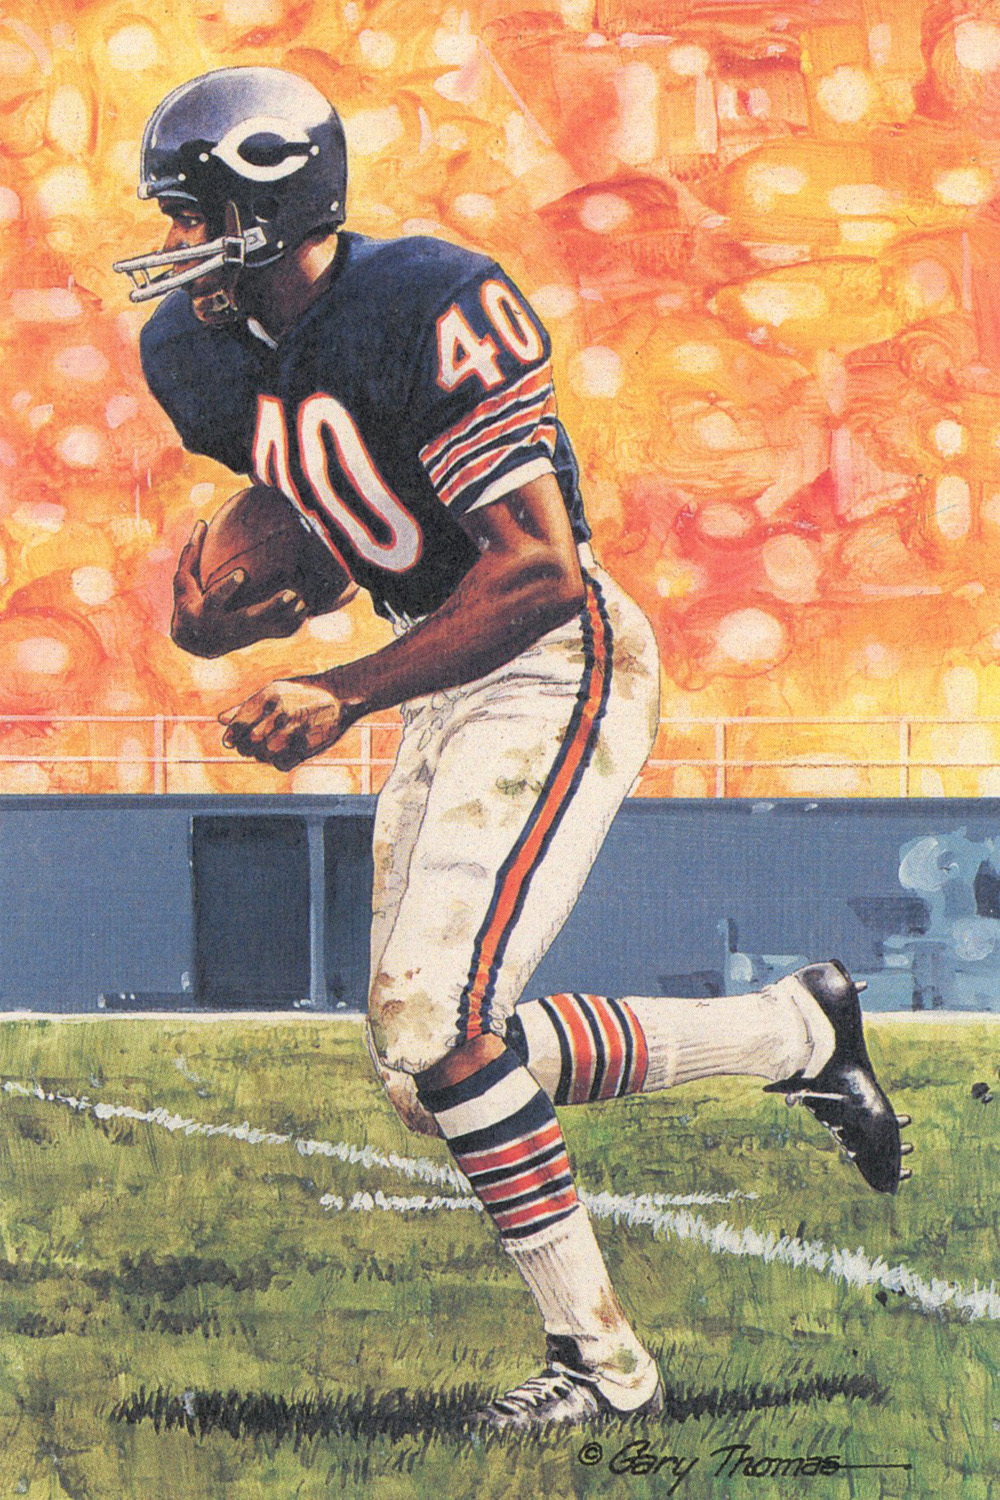 Gale Sayers 1992 Unsigned Series Four Goal Line Art Card Chicago Bears